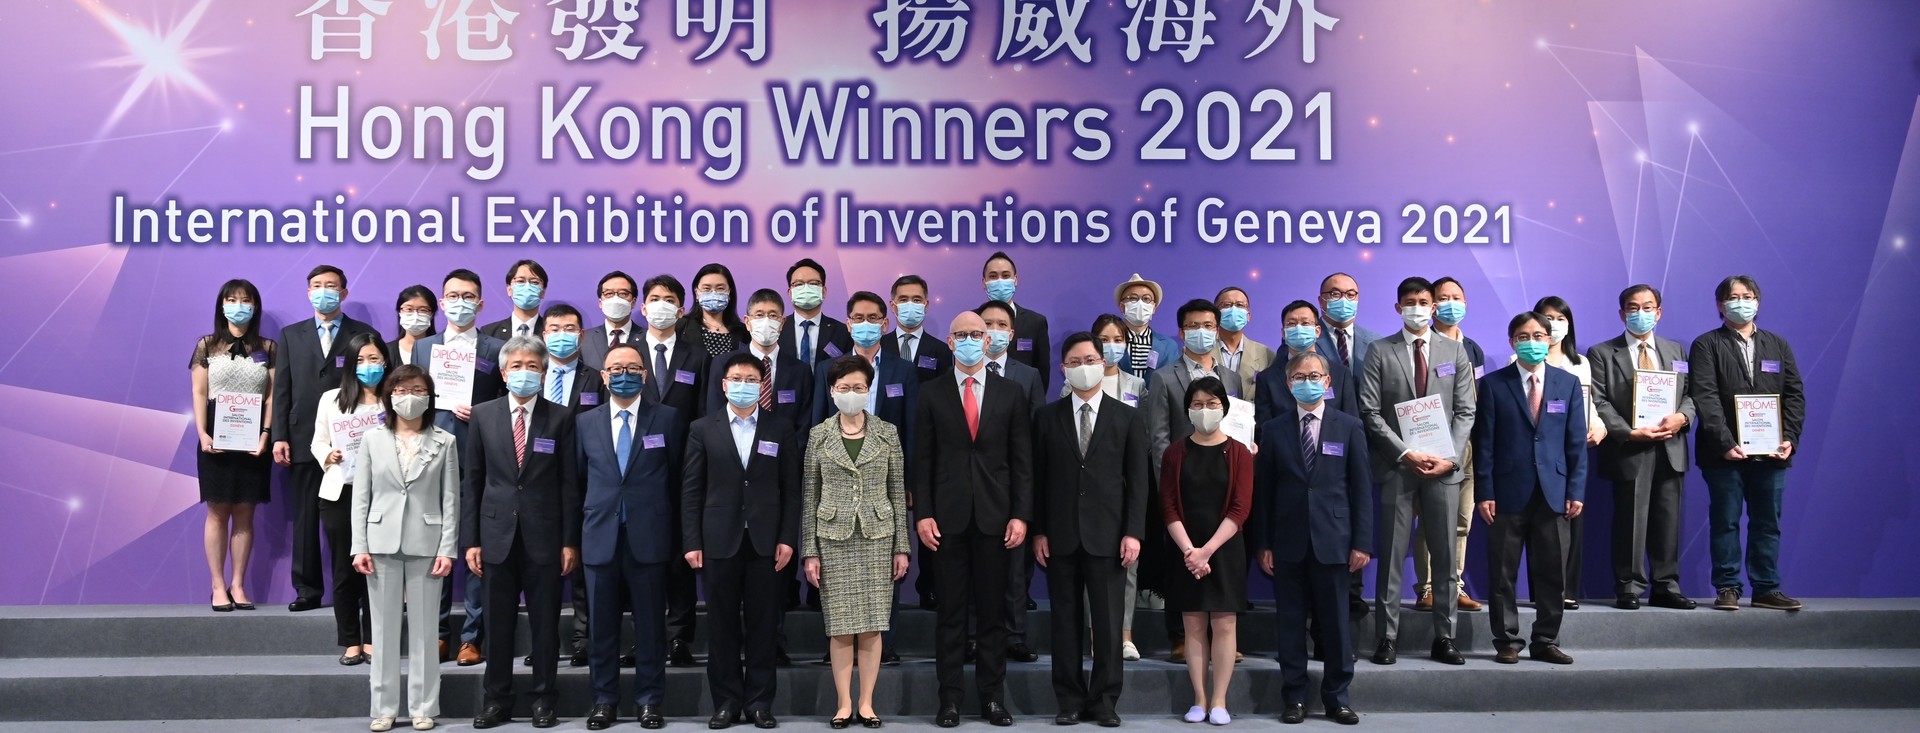 HKU Awardees Acclaimed at CE’s Reception for Awardees of International Exhibition of Inventions of Geneva 2021